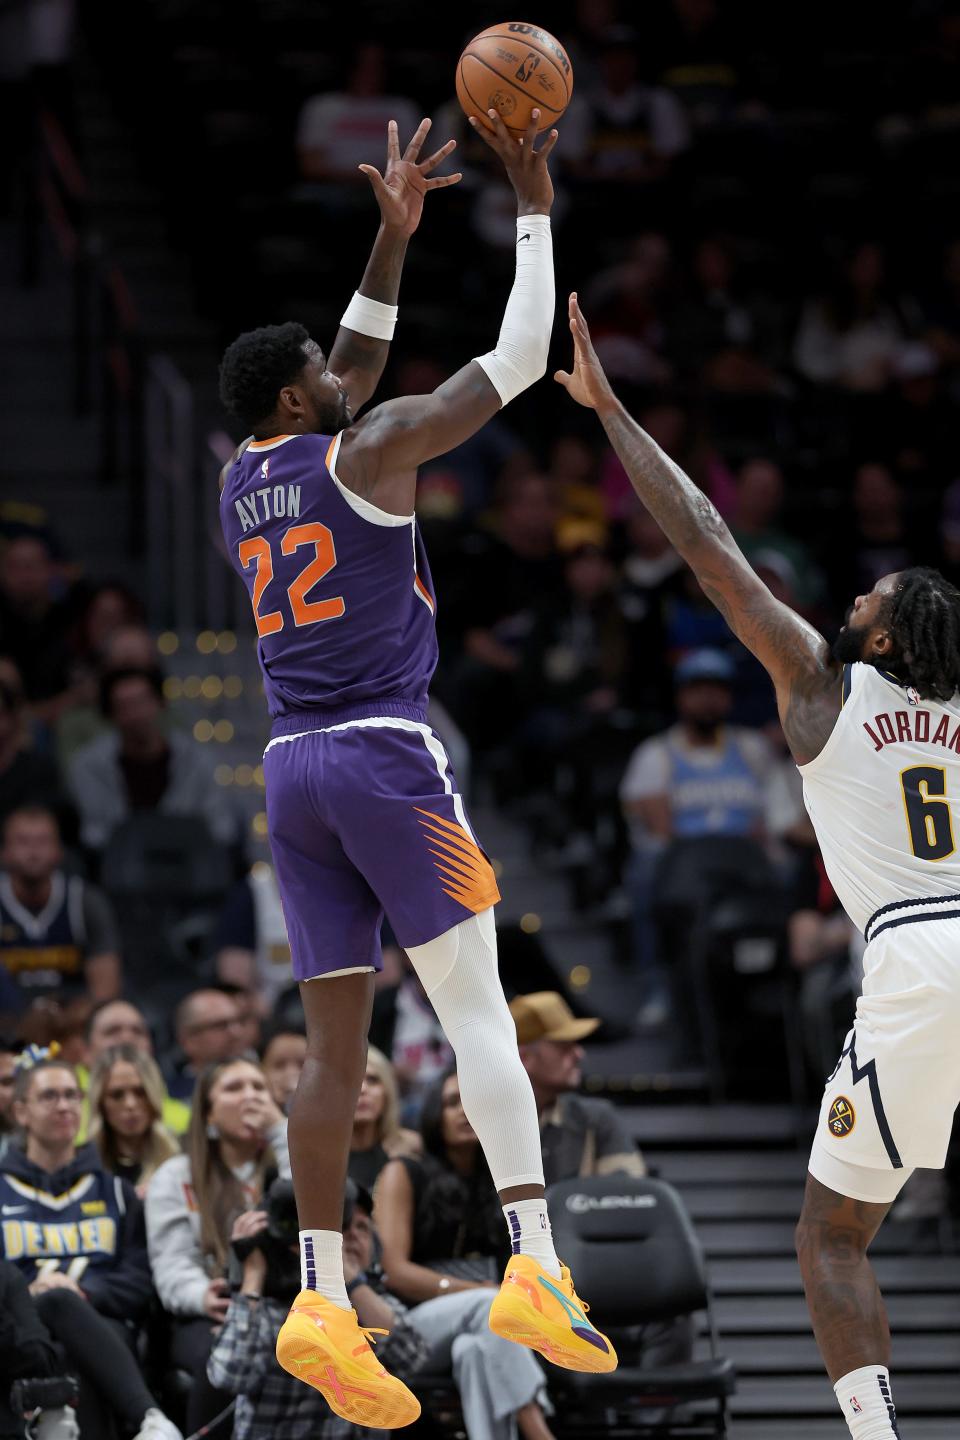 DENVER, COLORADO - OCTOBER 10: Deandre Ayton #22 of the Phoenix Suns puts up a shot over DeAndre Jordan #6 f the Denver Nuggets in the first quarter during a preseason game at Ball Arena on October 10, 2022 in Denver, Colorado. (Photo by Matthew Stockman/Getty Images)